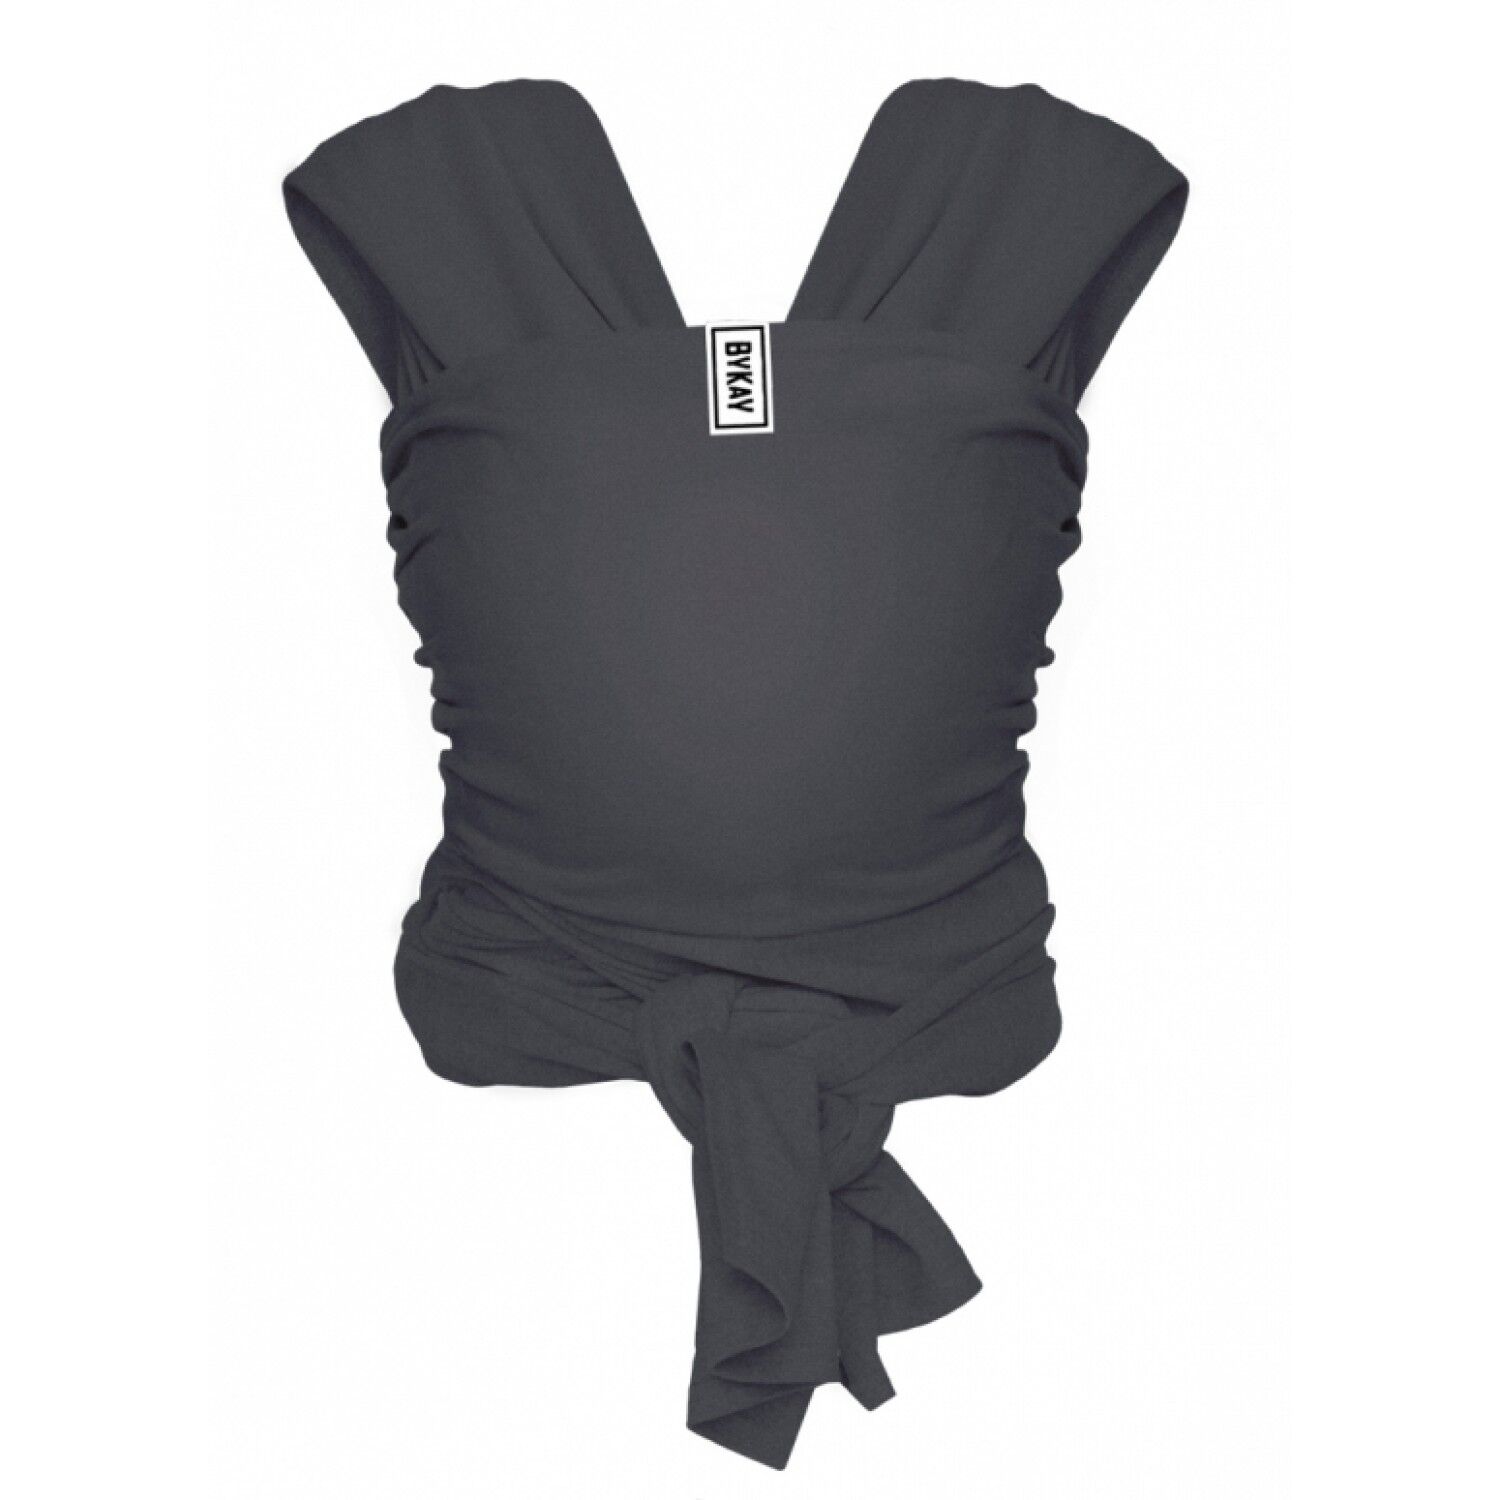 Bykay Écharpe de portage Gris Anthracite Taille M - Bykay